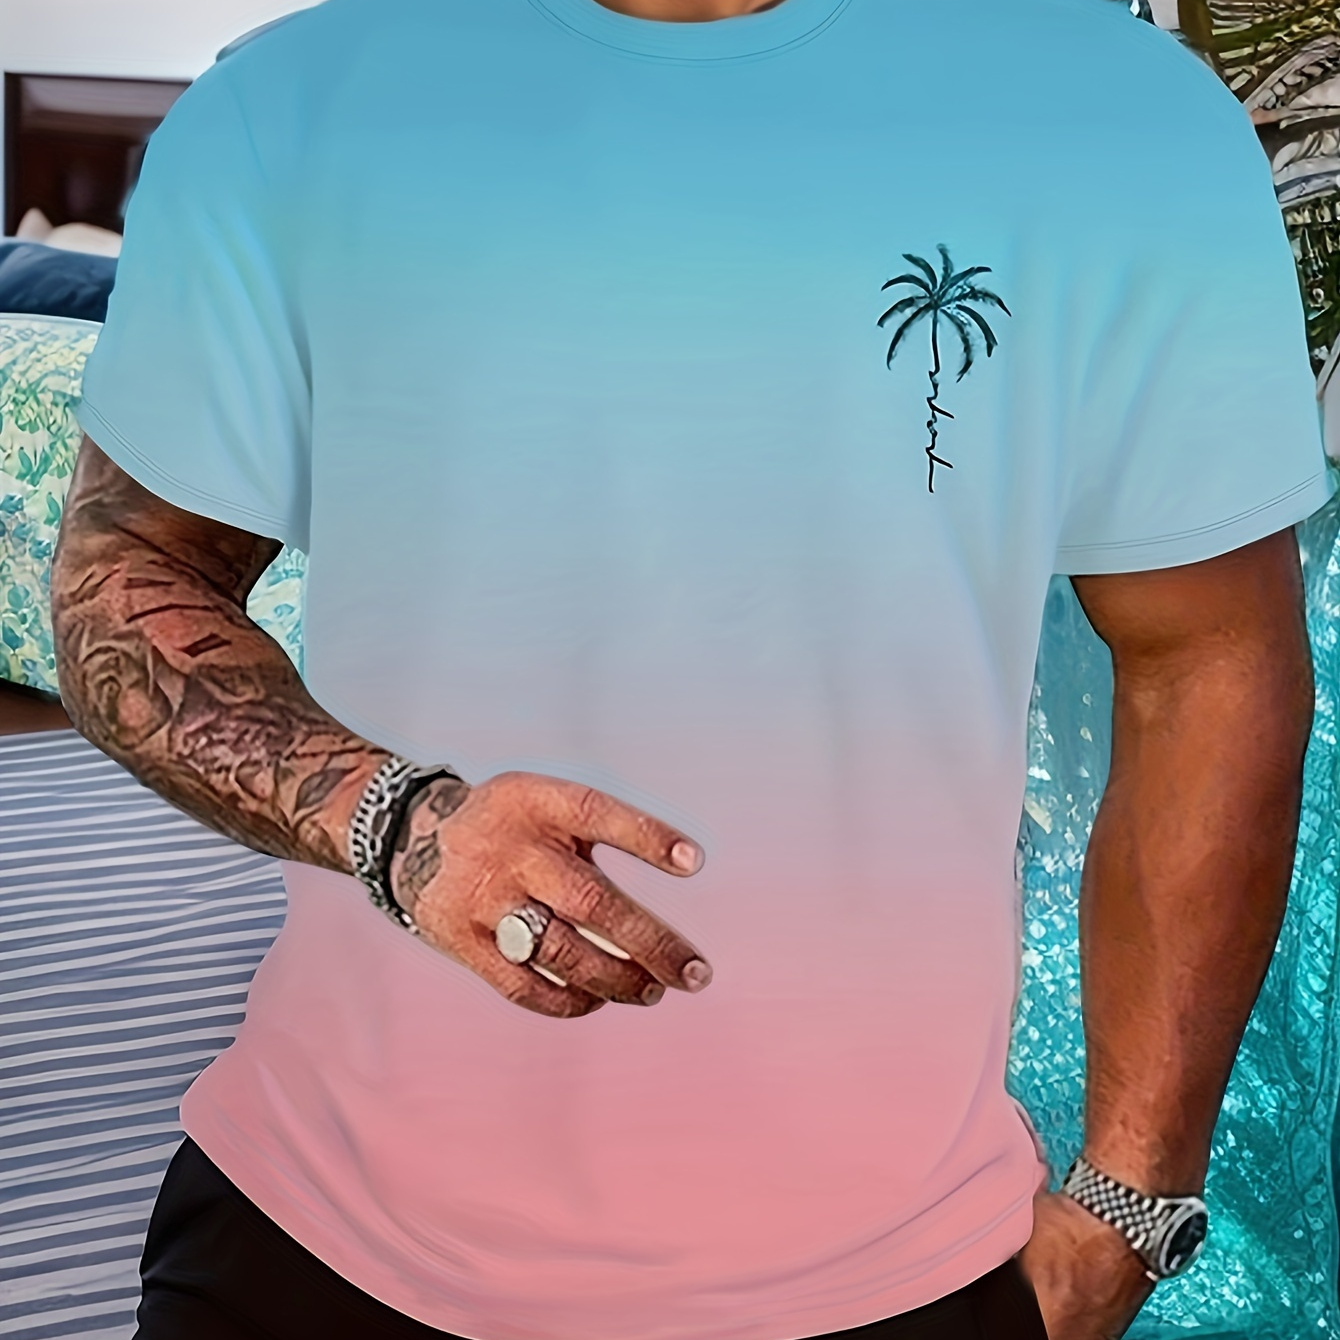 

Men's Summer Fashion Coconut Tree Graffiti Pattern And Gradient Color Crew Neck And Short Sleeve T-shirt, Chic And Trendy Tops For Daily And Holiday Leisurewear